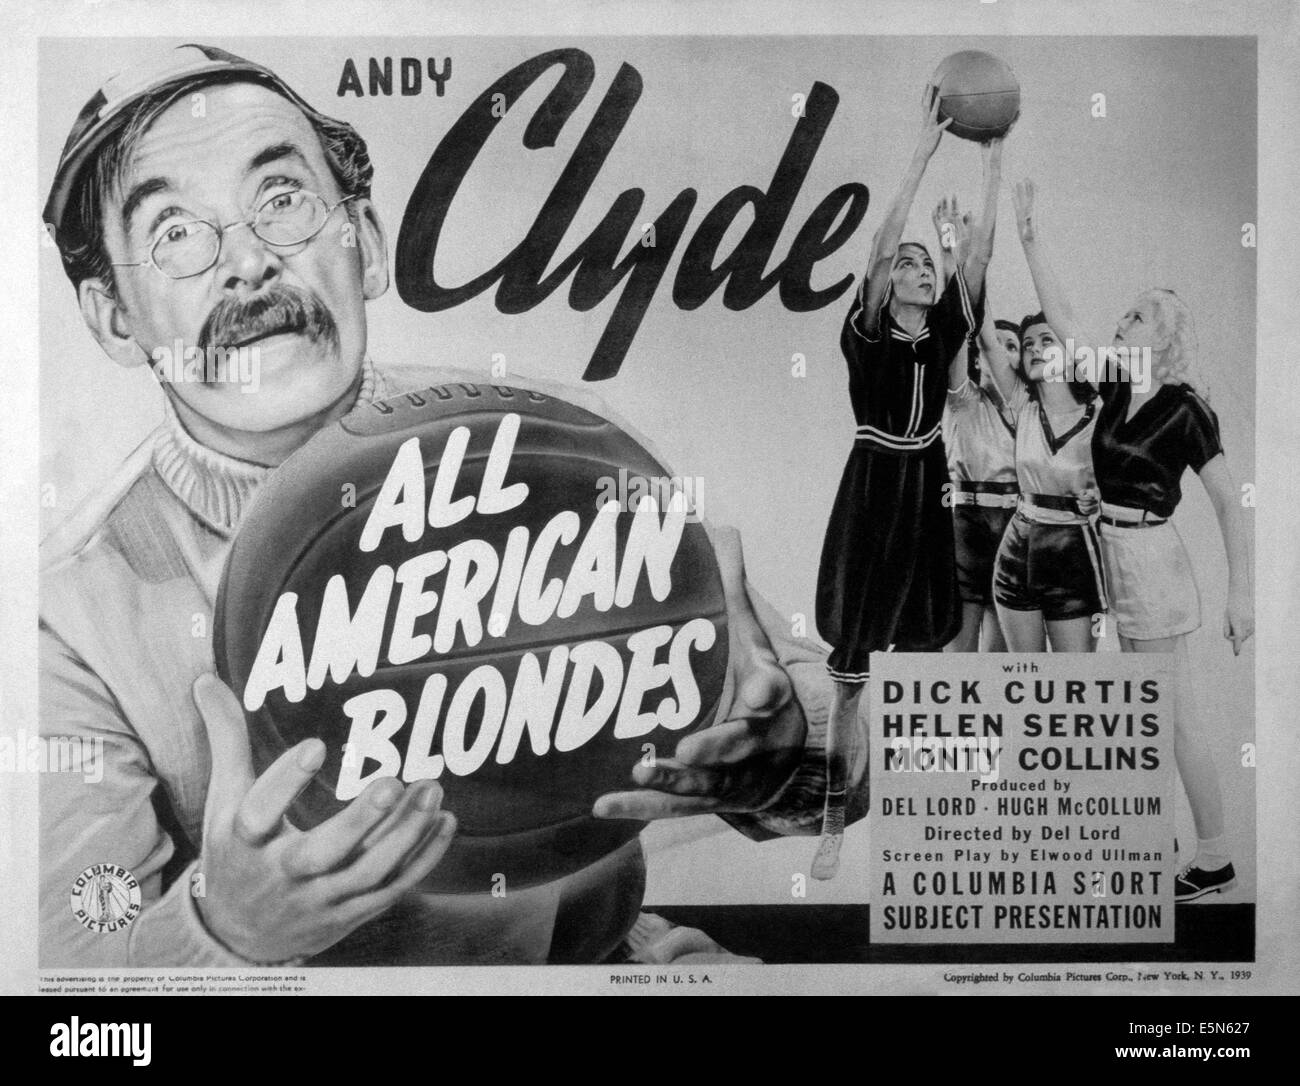 All-American-Blondinen, Andy Clyde (links), 1939 Stockfoto